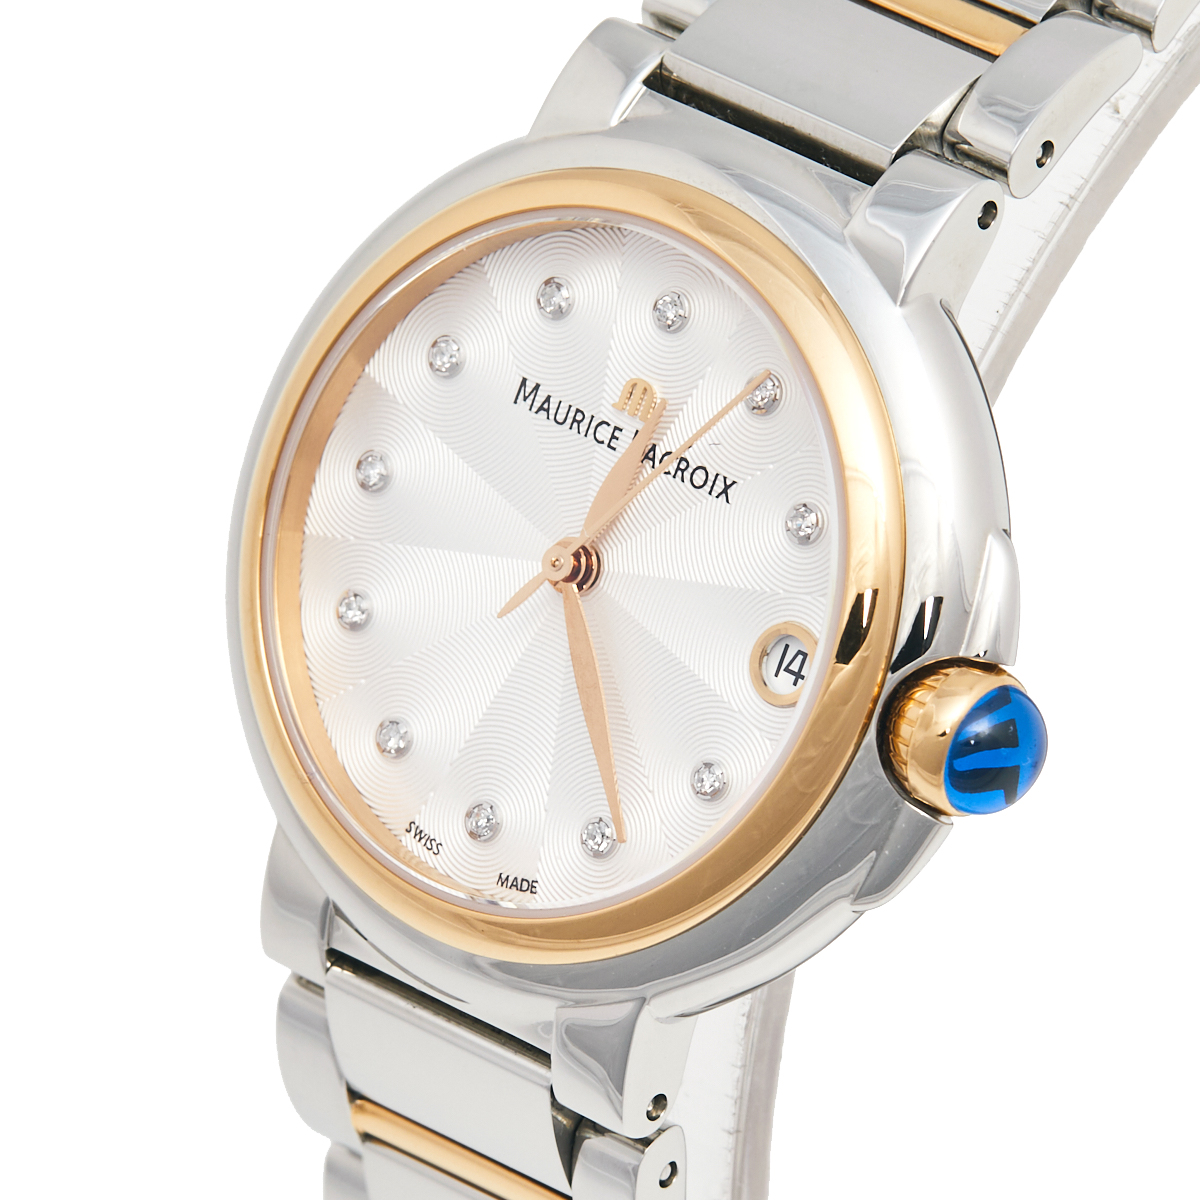 

Maurice Lacroix Silver Two Tone Stainless Steel Diamond Fiaba FA1004 Women's Wristwatch, Multicolor